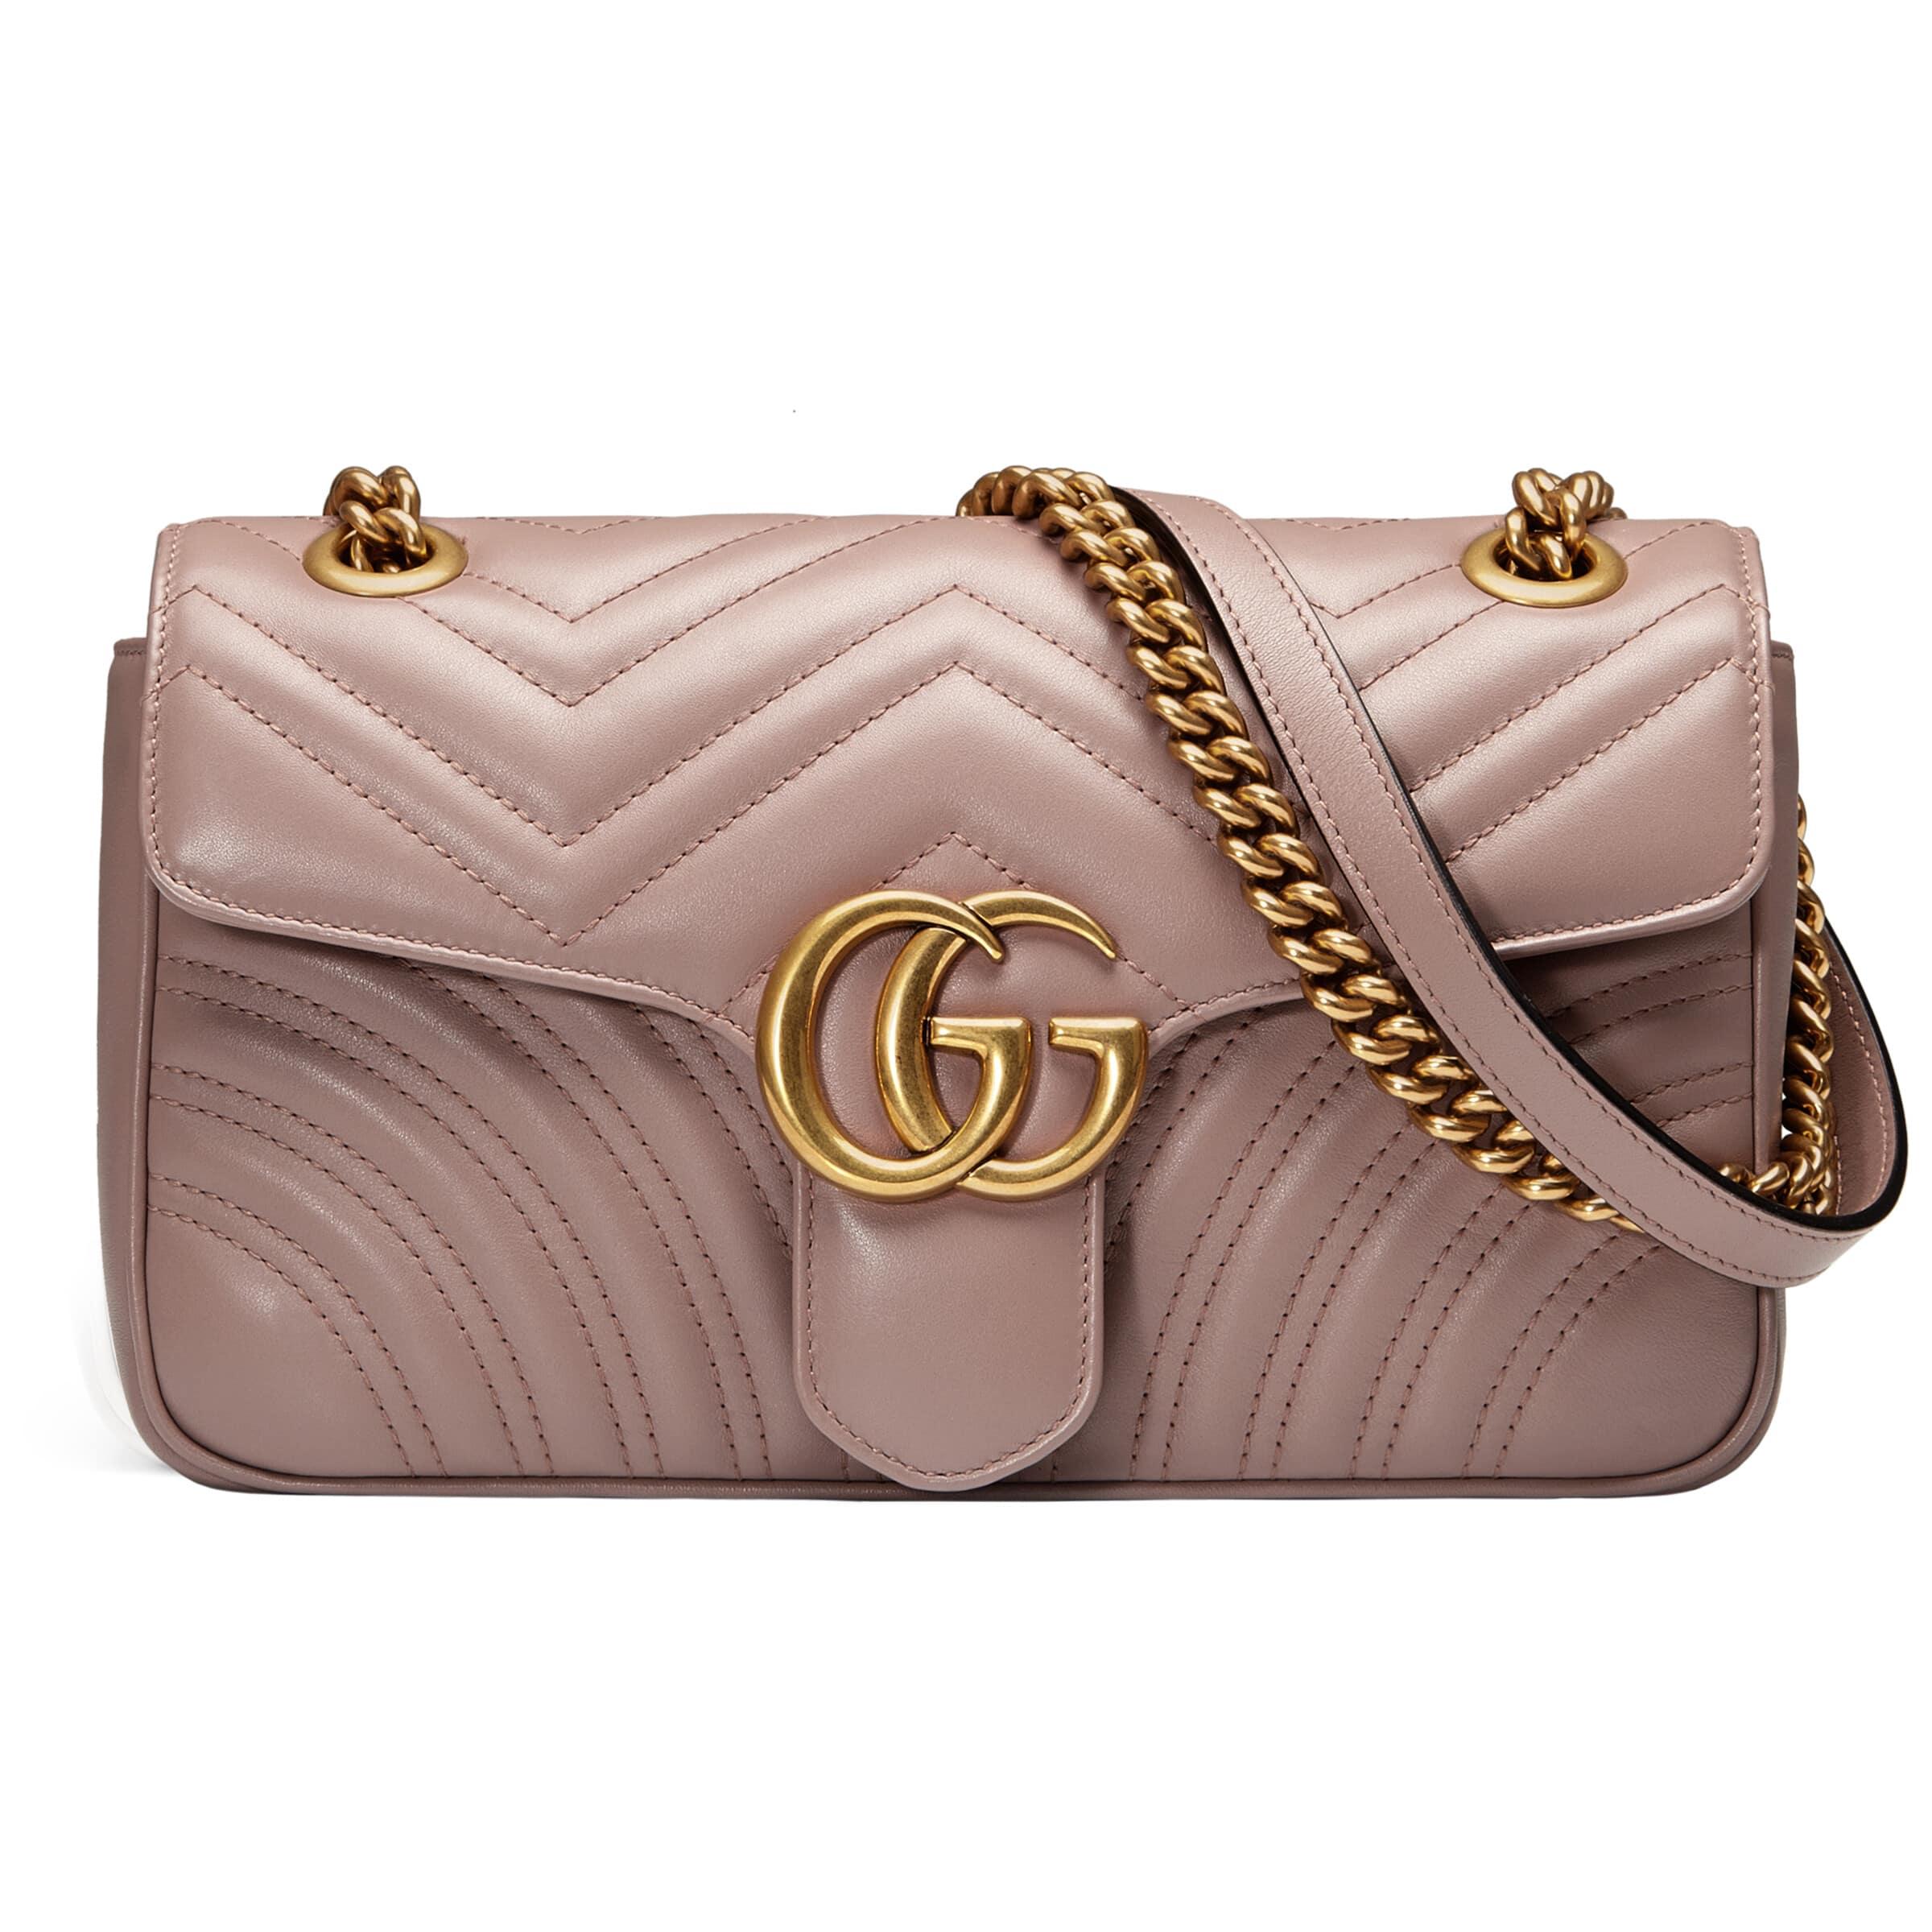 Gucci Leather GG Marmont Matelassé Shoulder Bag in Nude (Pink) - Save 26% |  Lyst